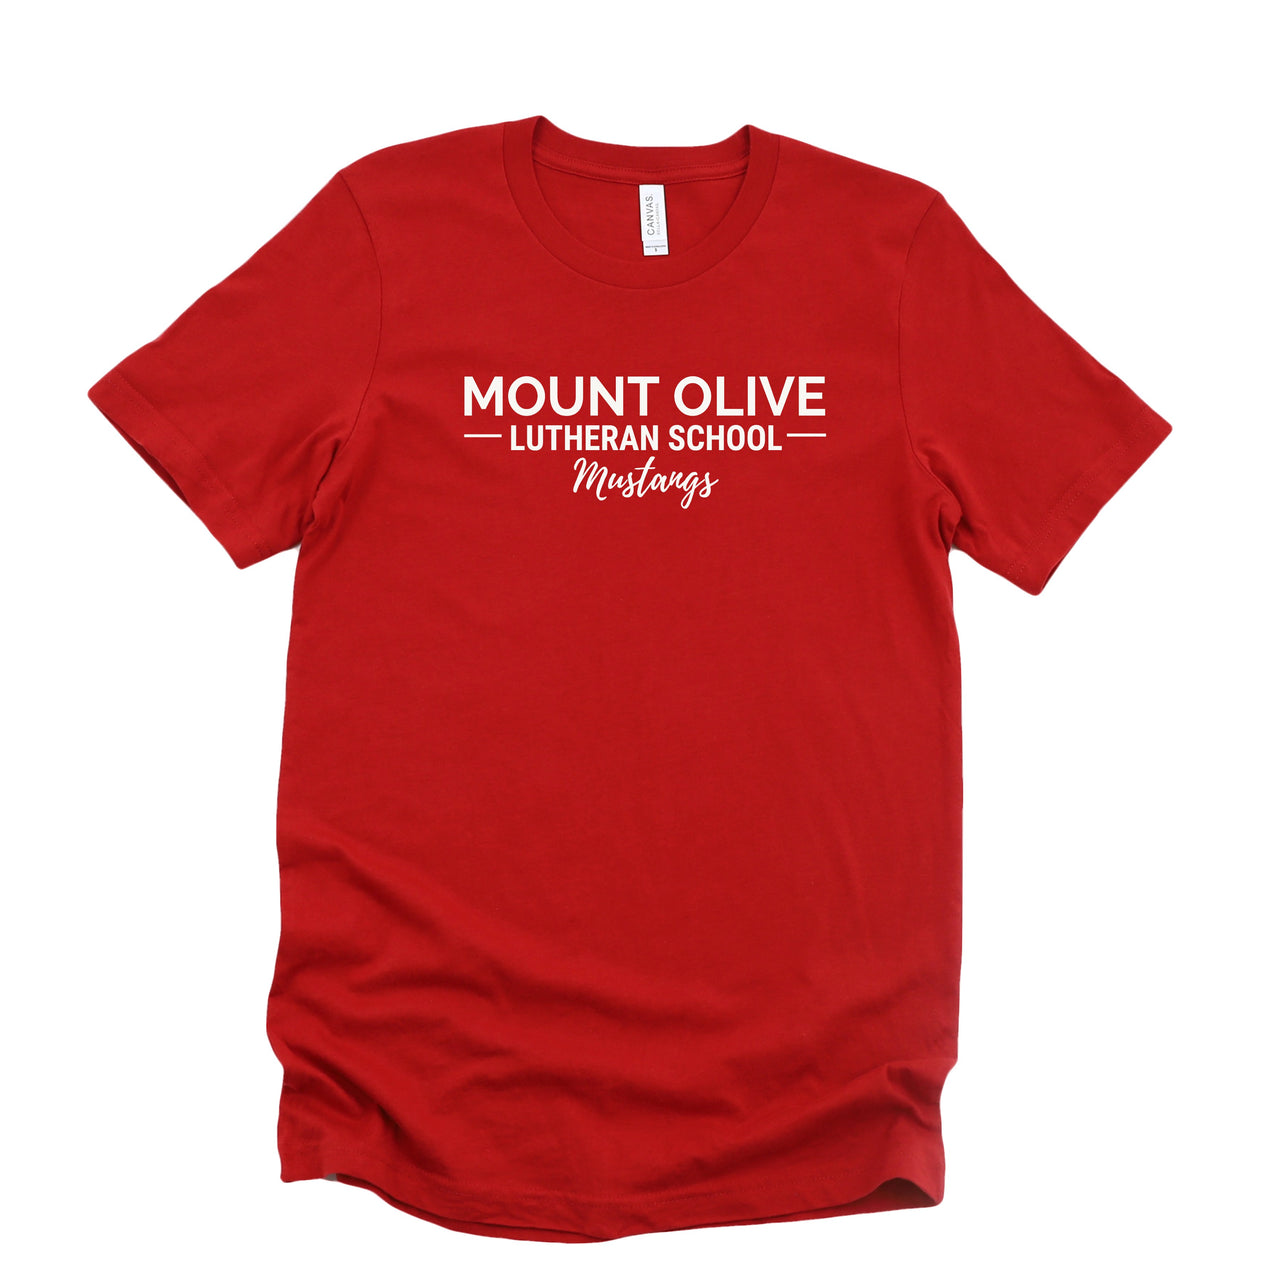 Adult, Youth & Toddler - Unisex Tee (Mount Olive Lutheran)